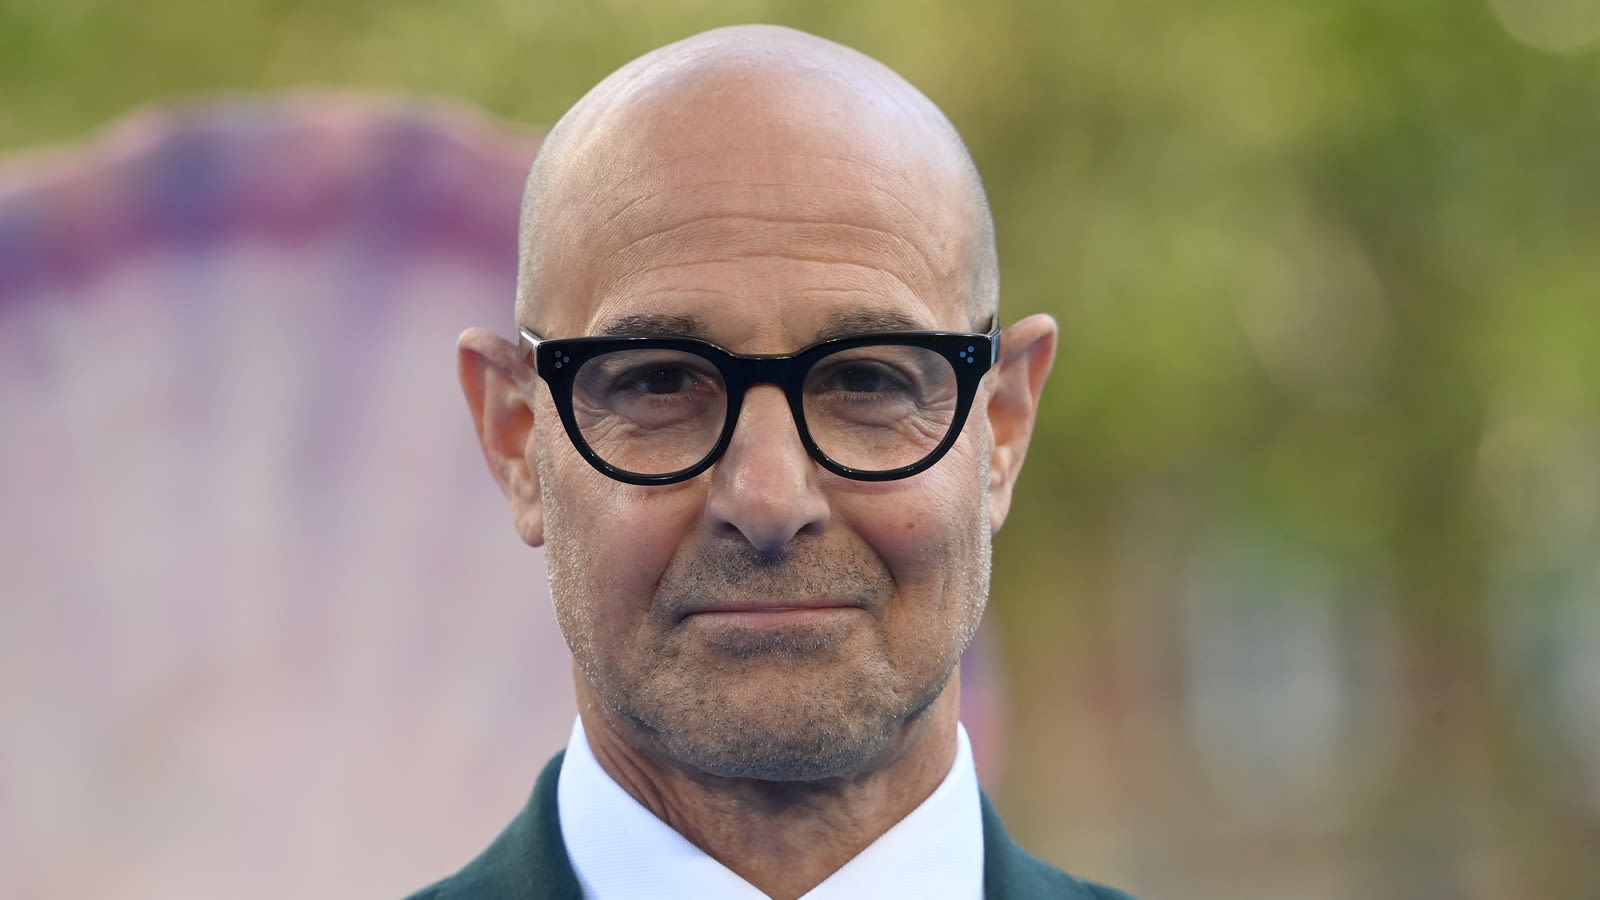 Stanley Tucci Claims This Pasta Dish Is One Of The Best Things He's Ever Eaten